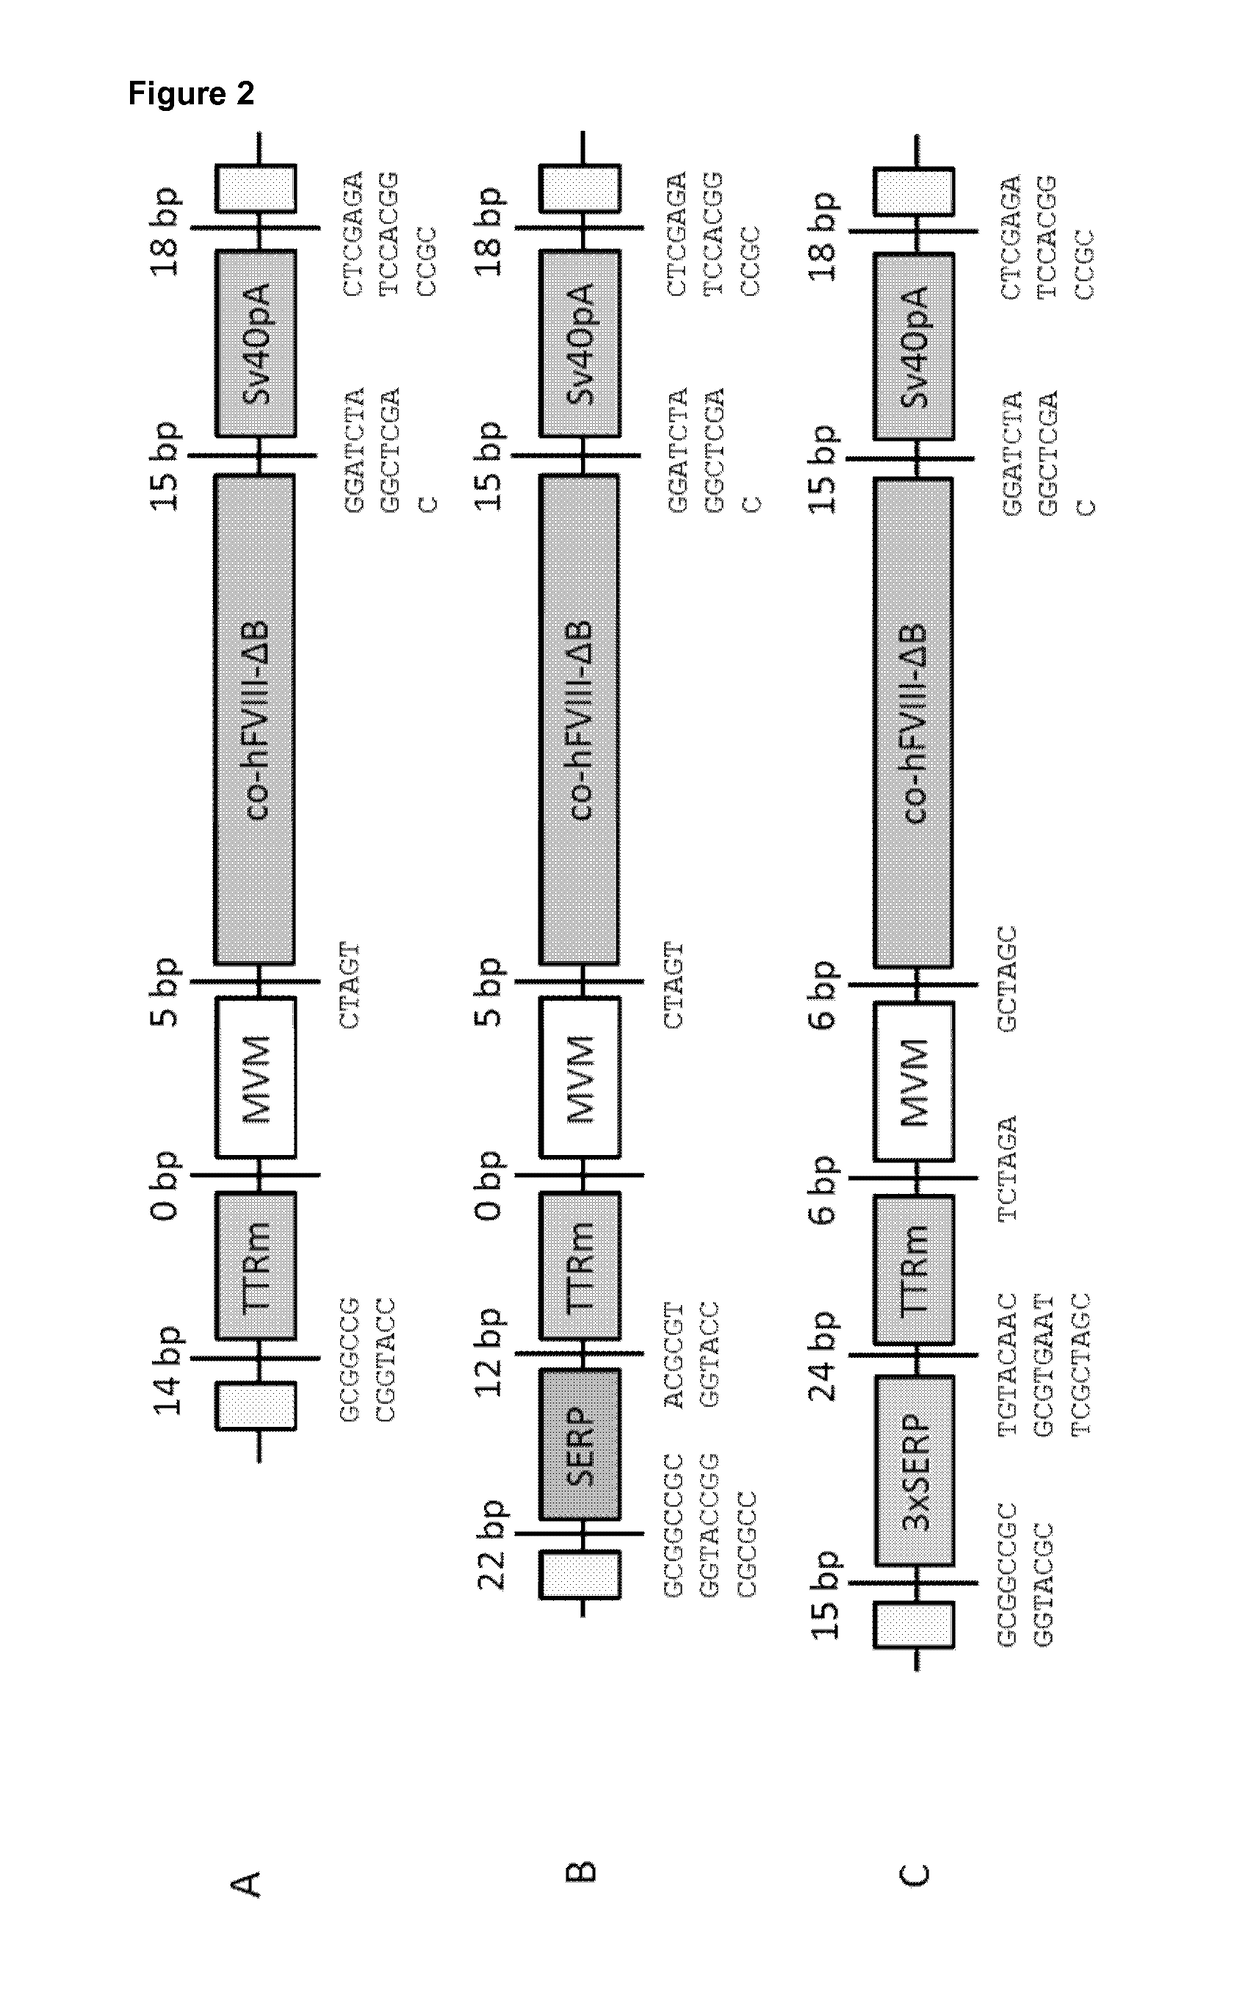 Optimized Liver-Specific Expression Systems for FVIII and FIX